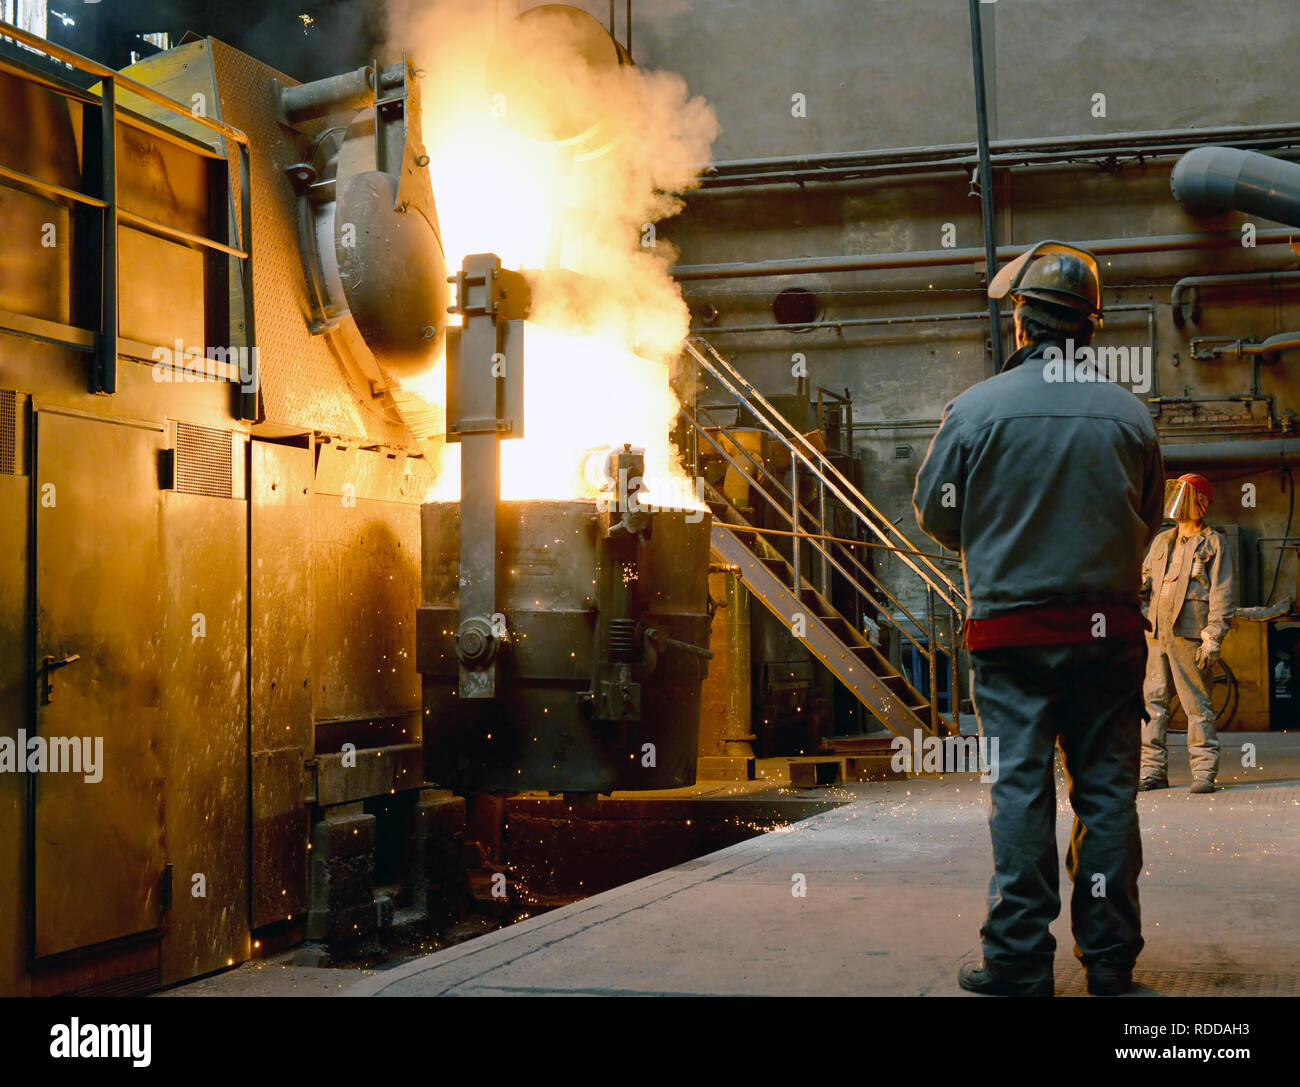 Berlin, Germany - April 18, 2013: Production of metal components in a foundry - group of workers Stock Photo